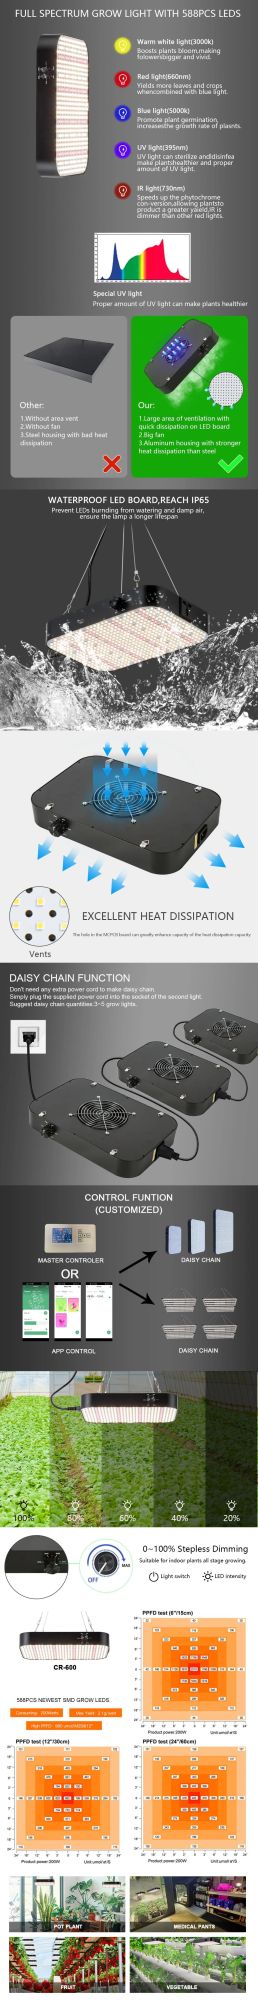 LED Grow Light 588 Watts 756PCS LEDs Full Spectrum LED Growing Lamps with APP Control Daisy Chain Dimmable Grow Lights UL Listed Licensed Grower′ S Choice